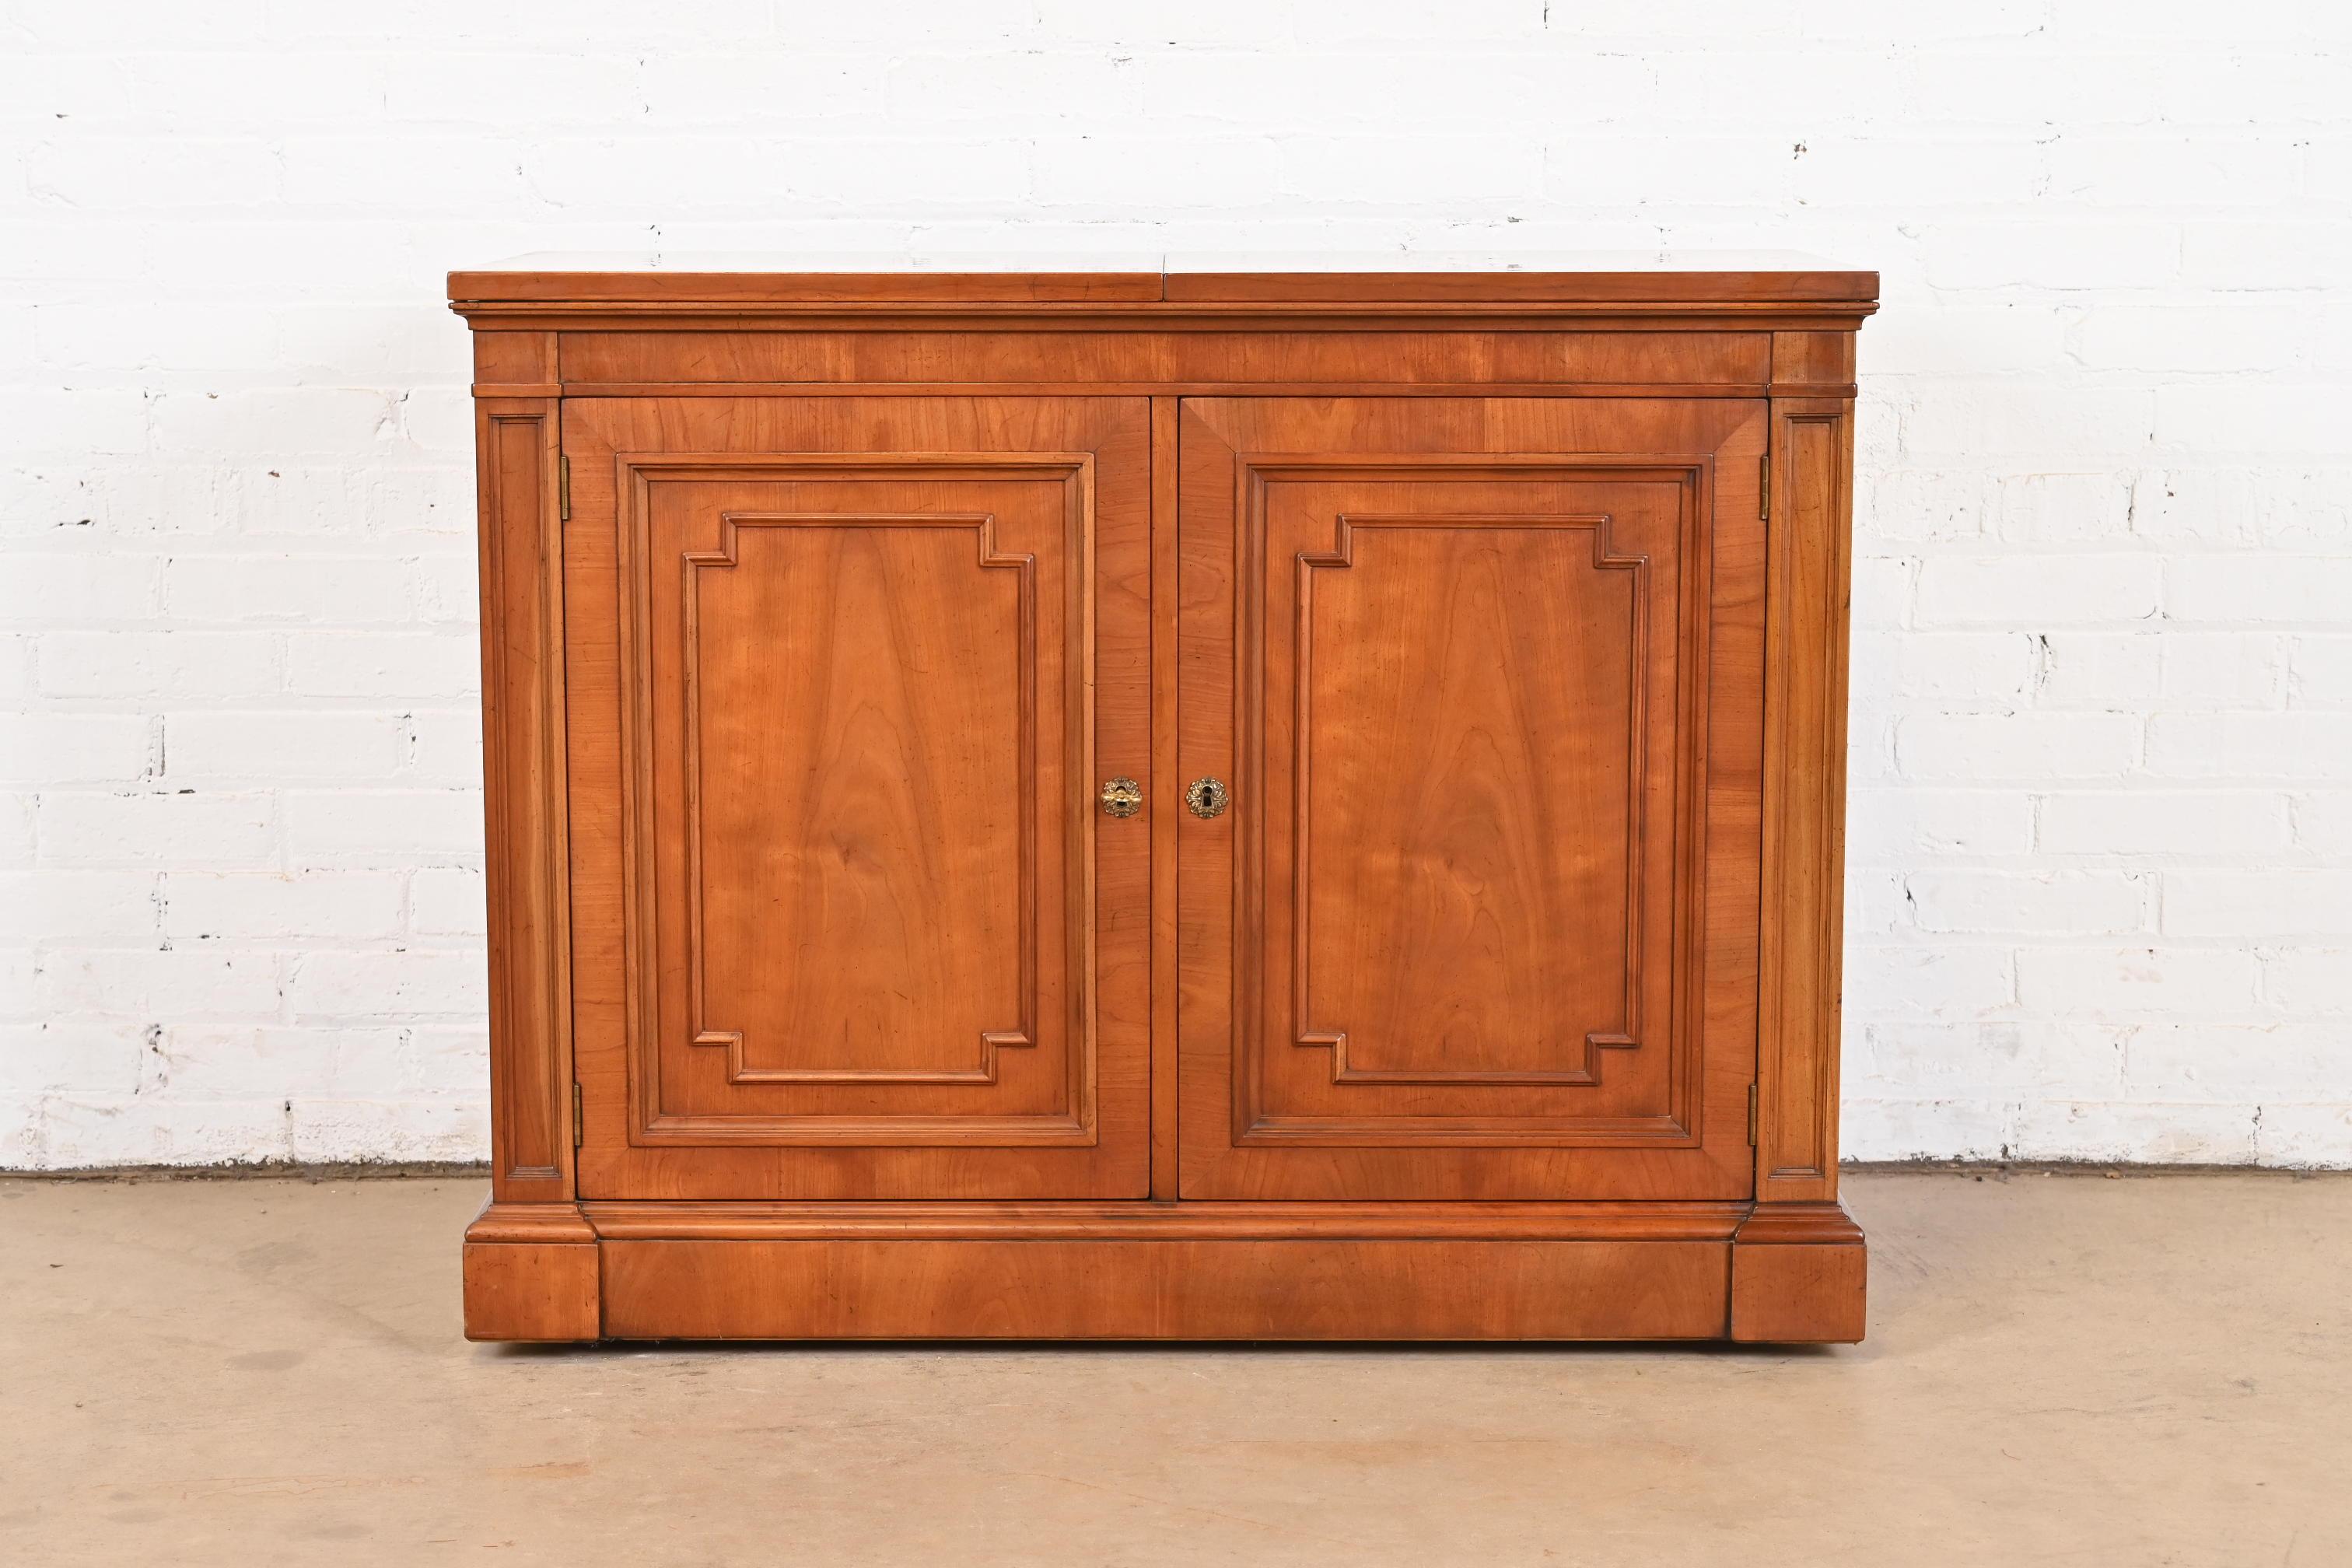 Kindel Furniture French Regency Cherry Wood Flip Top Rolling Bar Cabinet In Good Condition For Sale In South Bend, IN